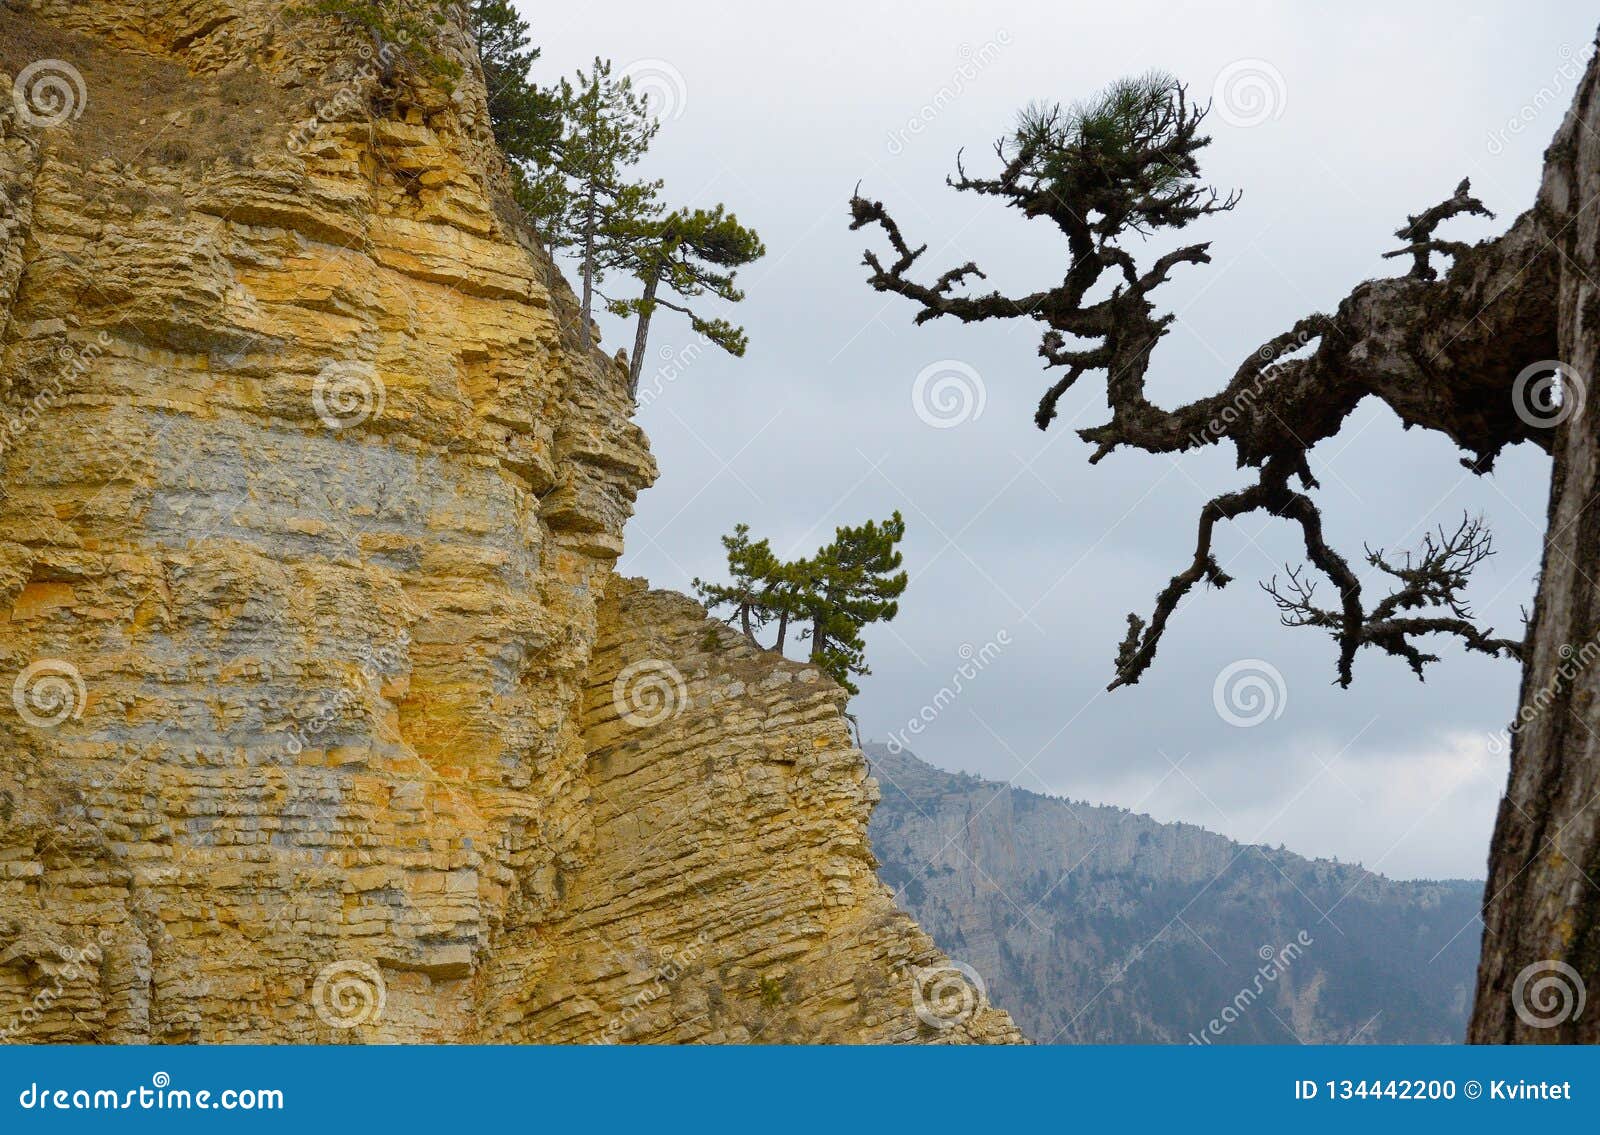 Pine at Edge Rocky Cliff Stock Photo Image of green, blue: